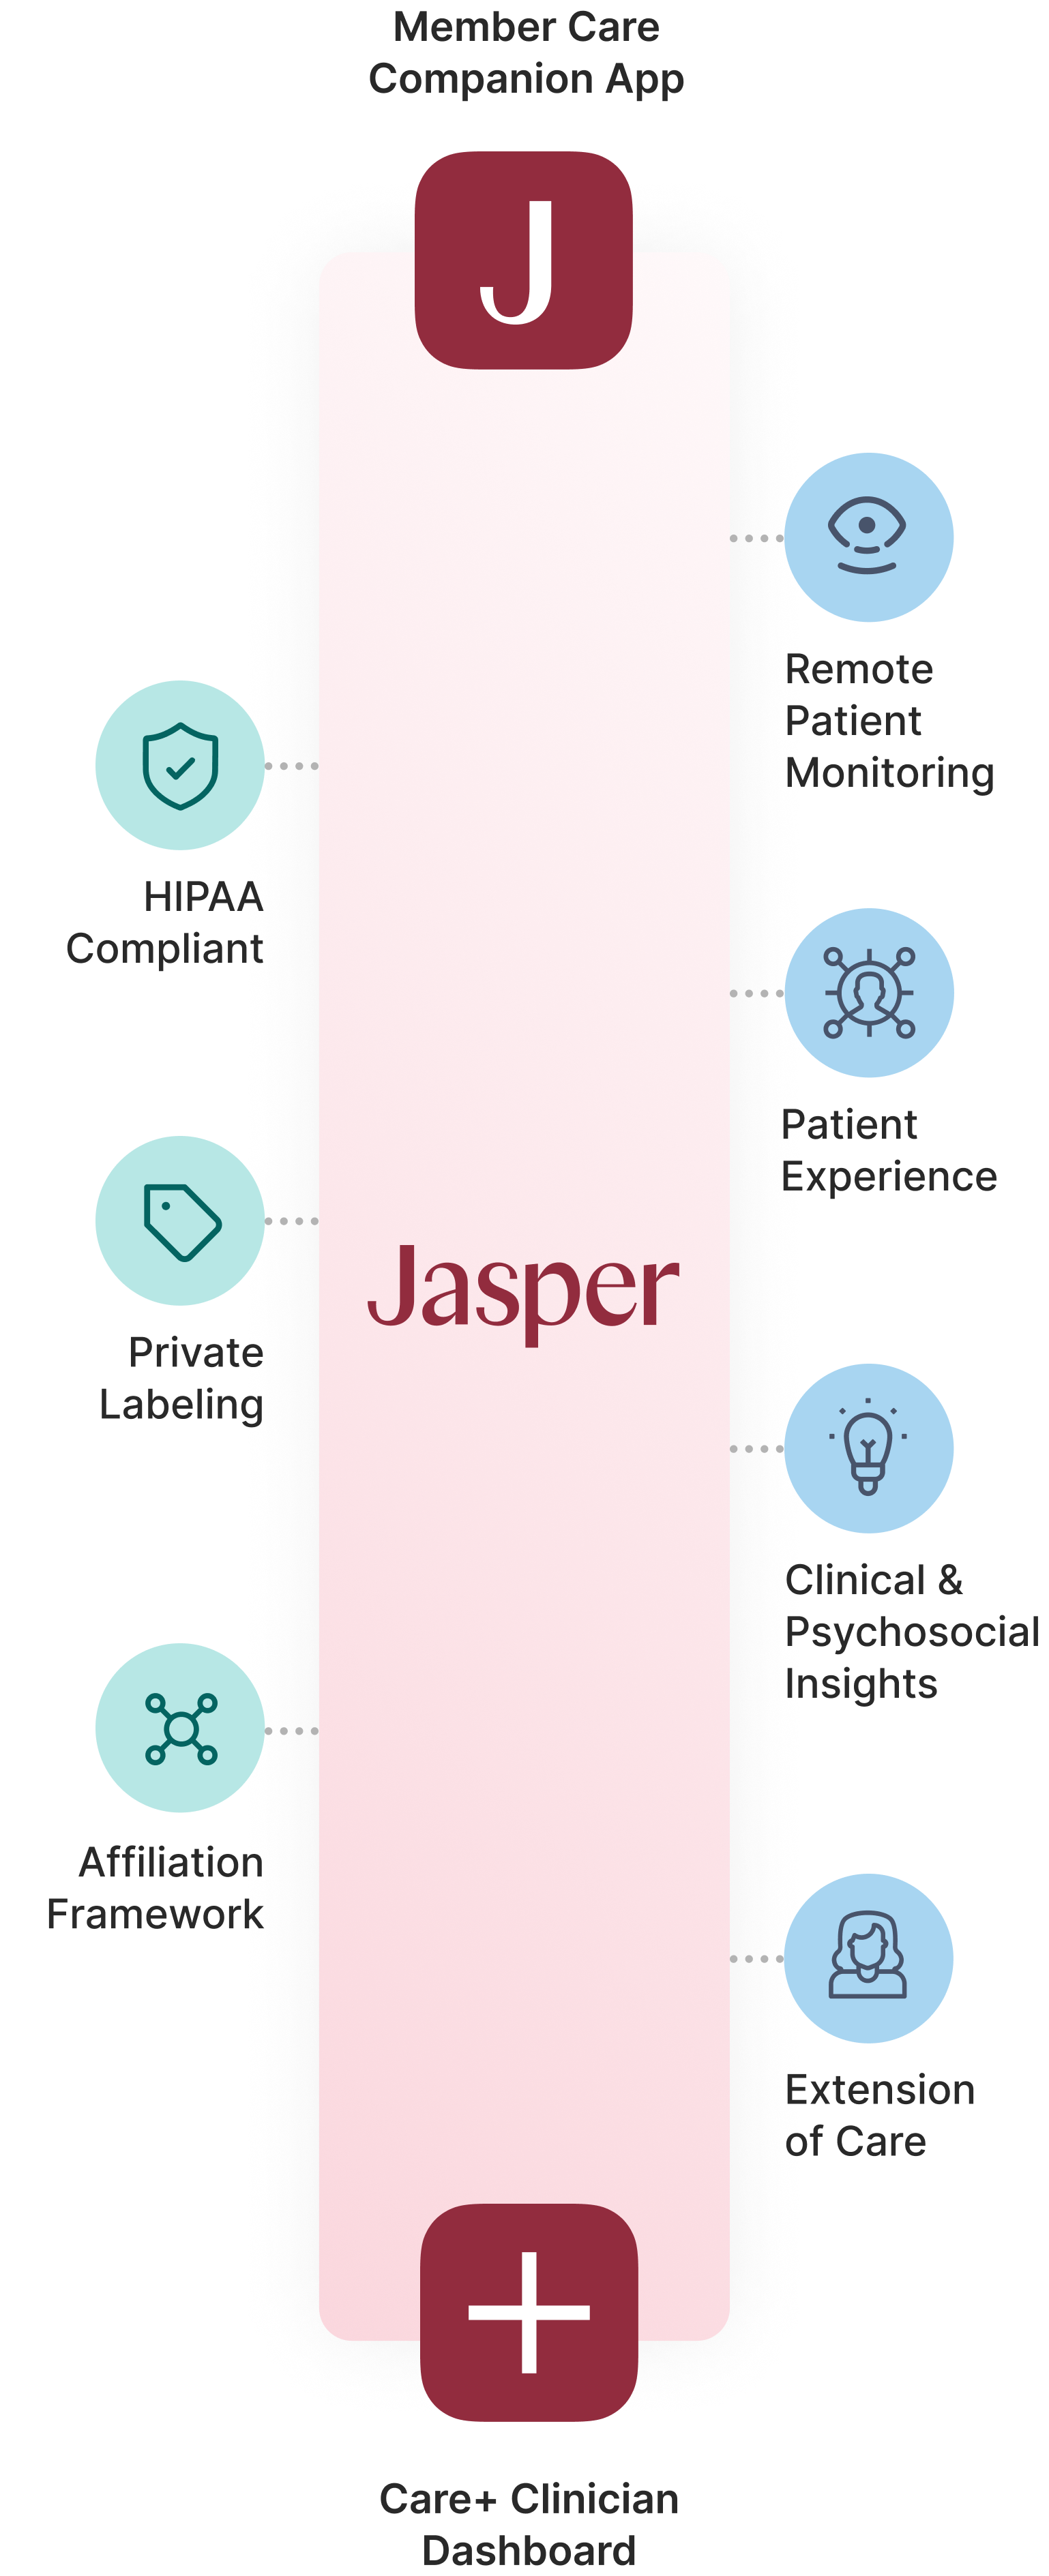 Member Care Companion App subtitle; Jasper J logo and Jasper logo. Pink horizontal rectangle surrounded by decorative clip art and Remote patient monitoring; Patient experience; Clinical & Psychology Insight; Extension of care; HIPAA Complaint; Private labeling; Affiliation Framework subtext. Care+Clinician Dashboard subtitle